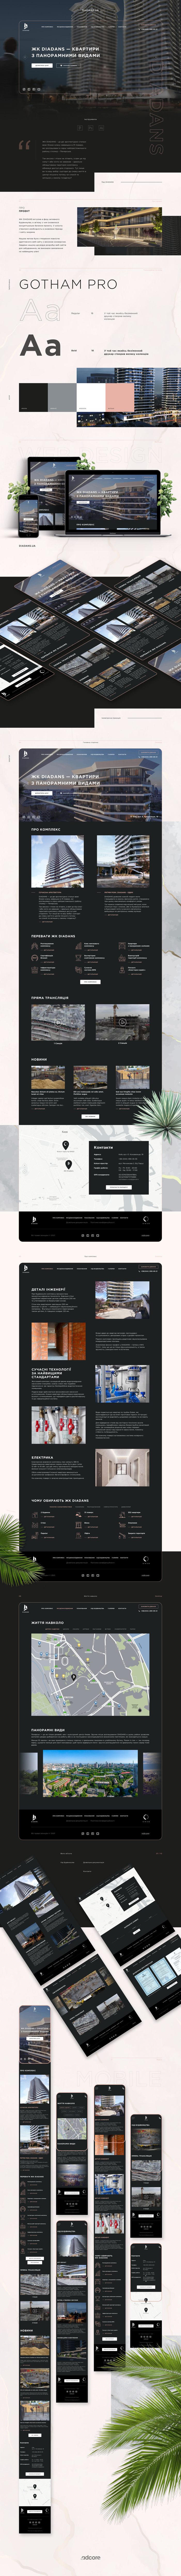 appartment Figma housing landing page real estate UI/UX user interface Web Design  Website лендинг